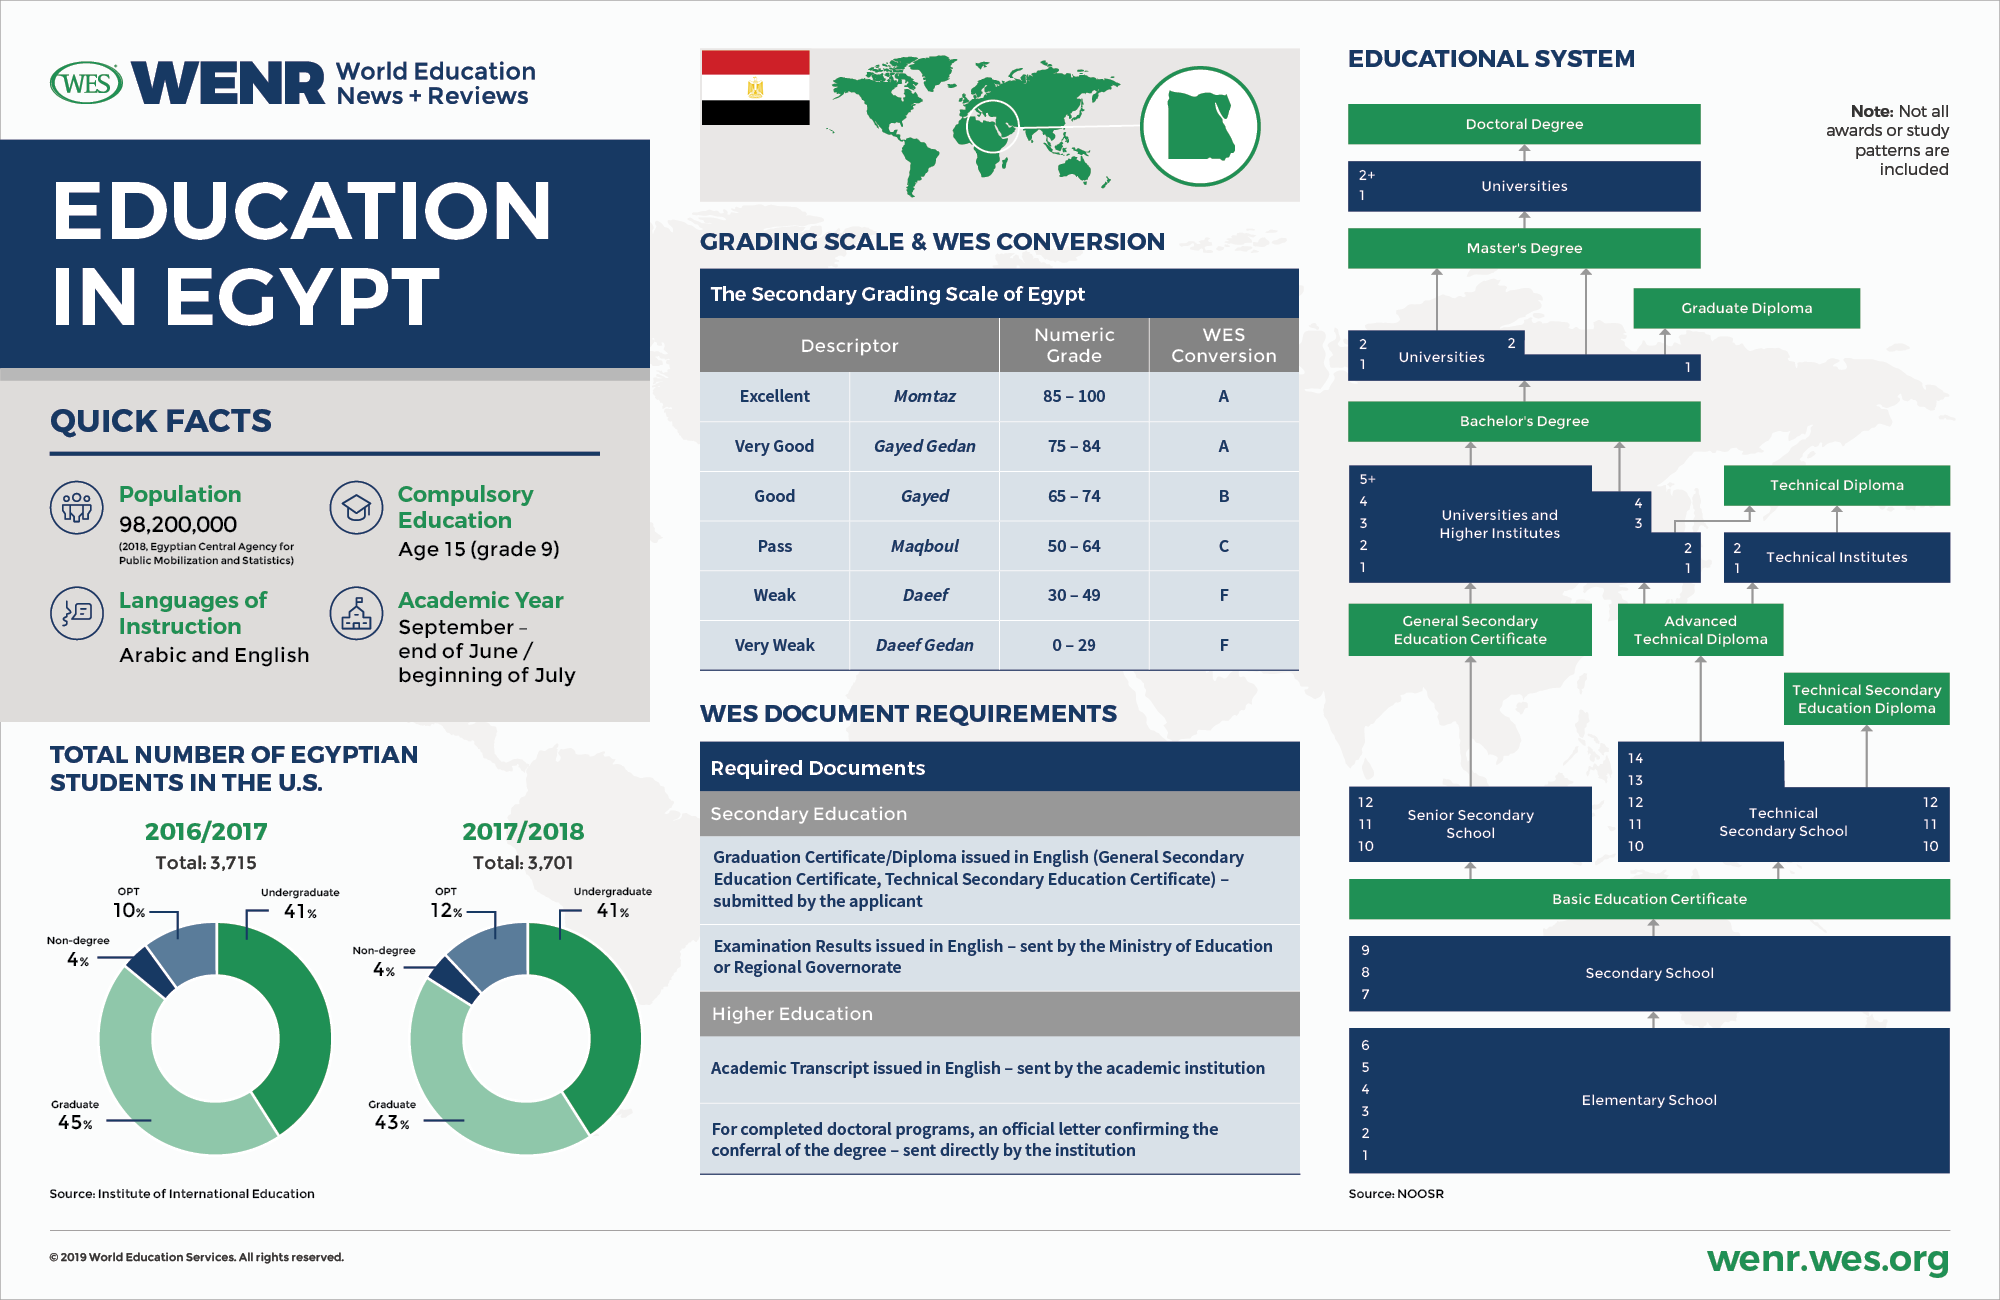 Fast facts on Egypt's educational system and international student mobility